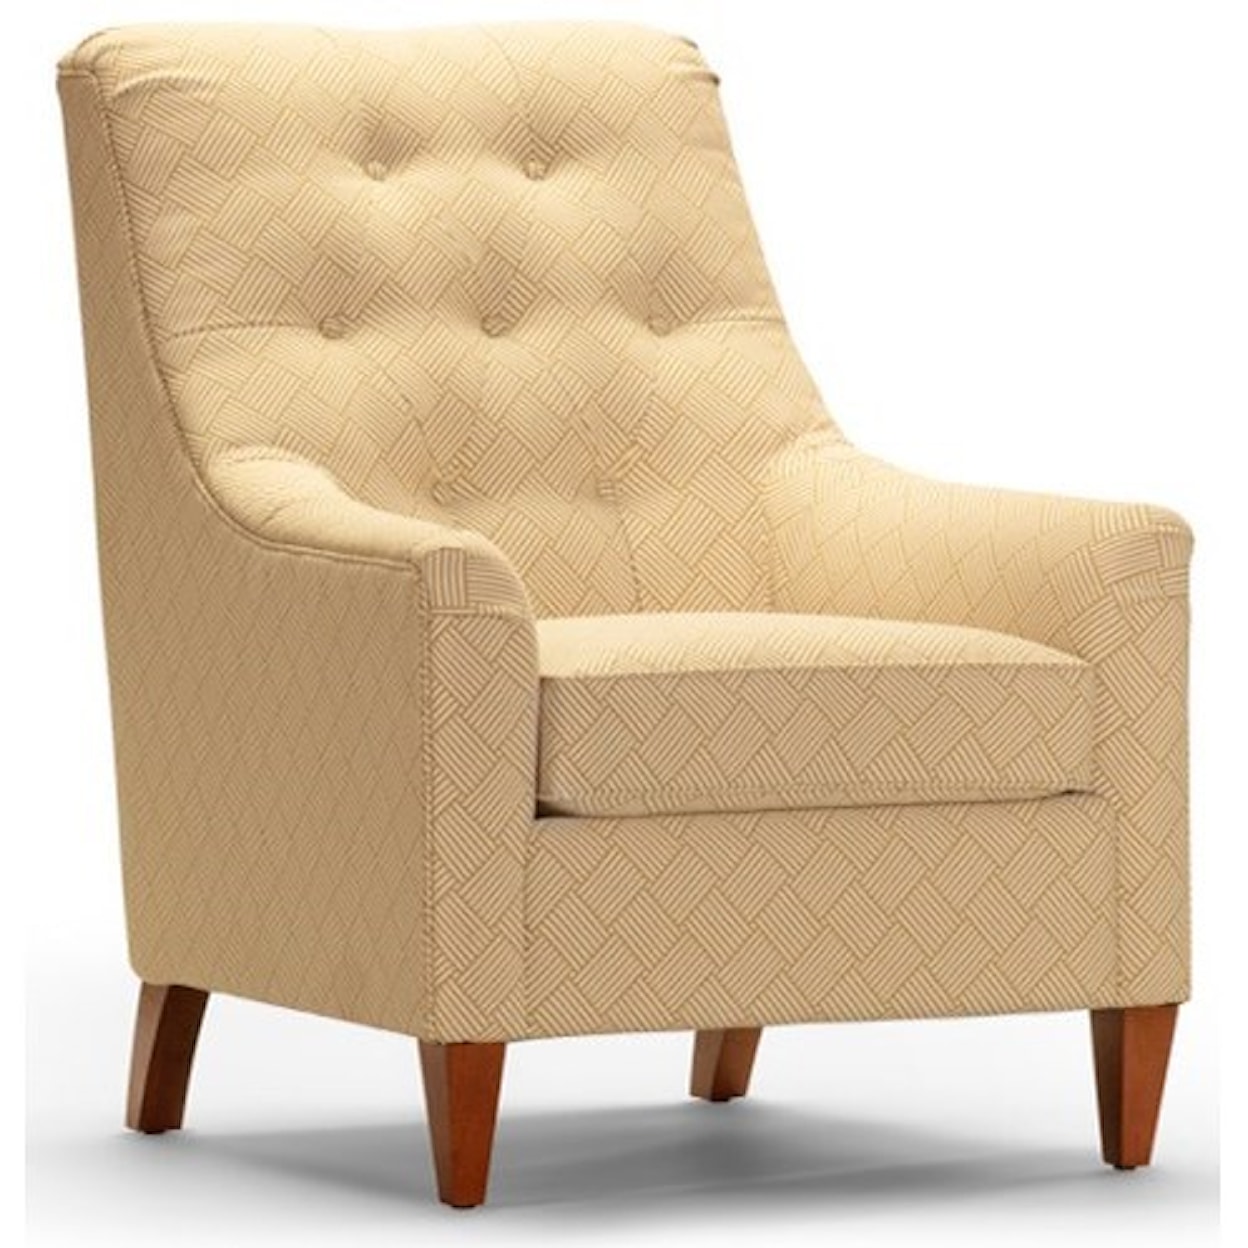 La-Z-Boy Chairs Upholstered Chair